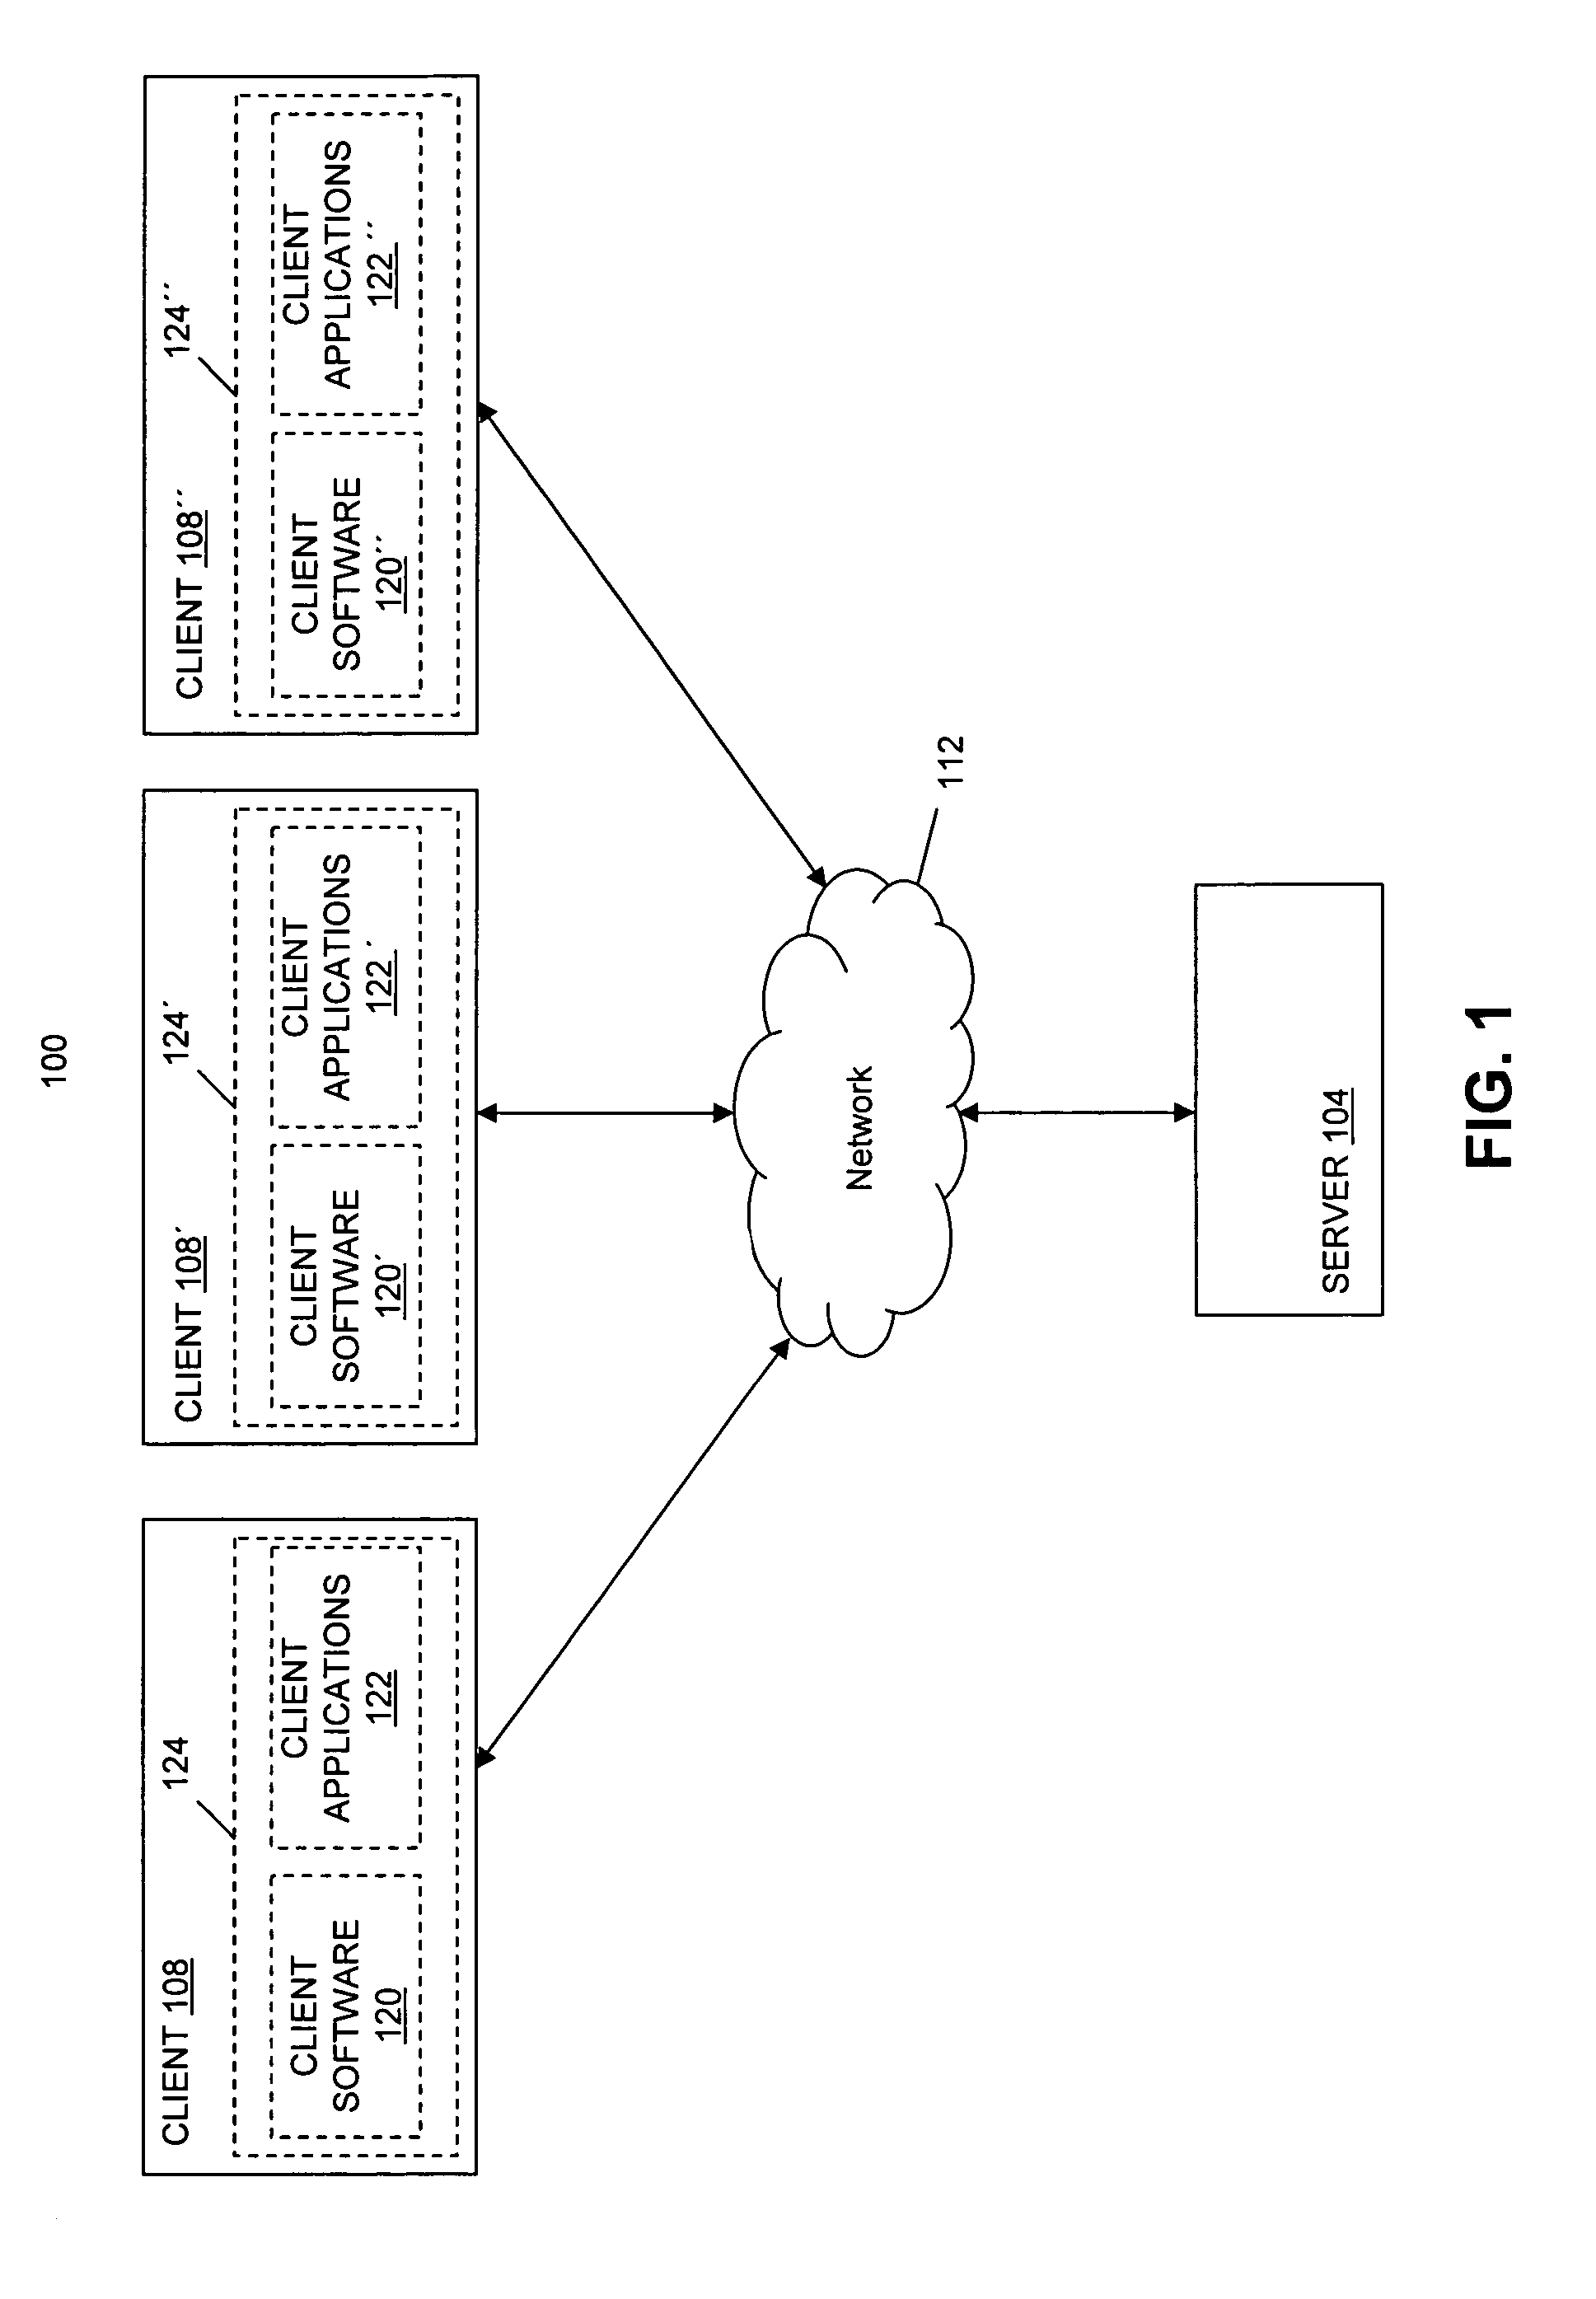 Systems and methods for automated application updating